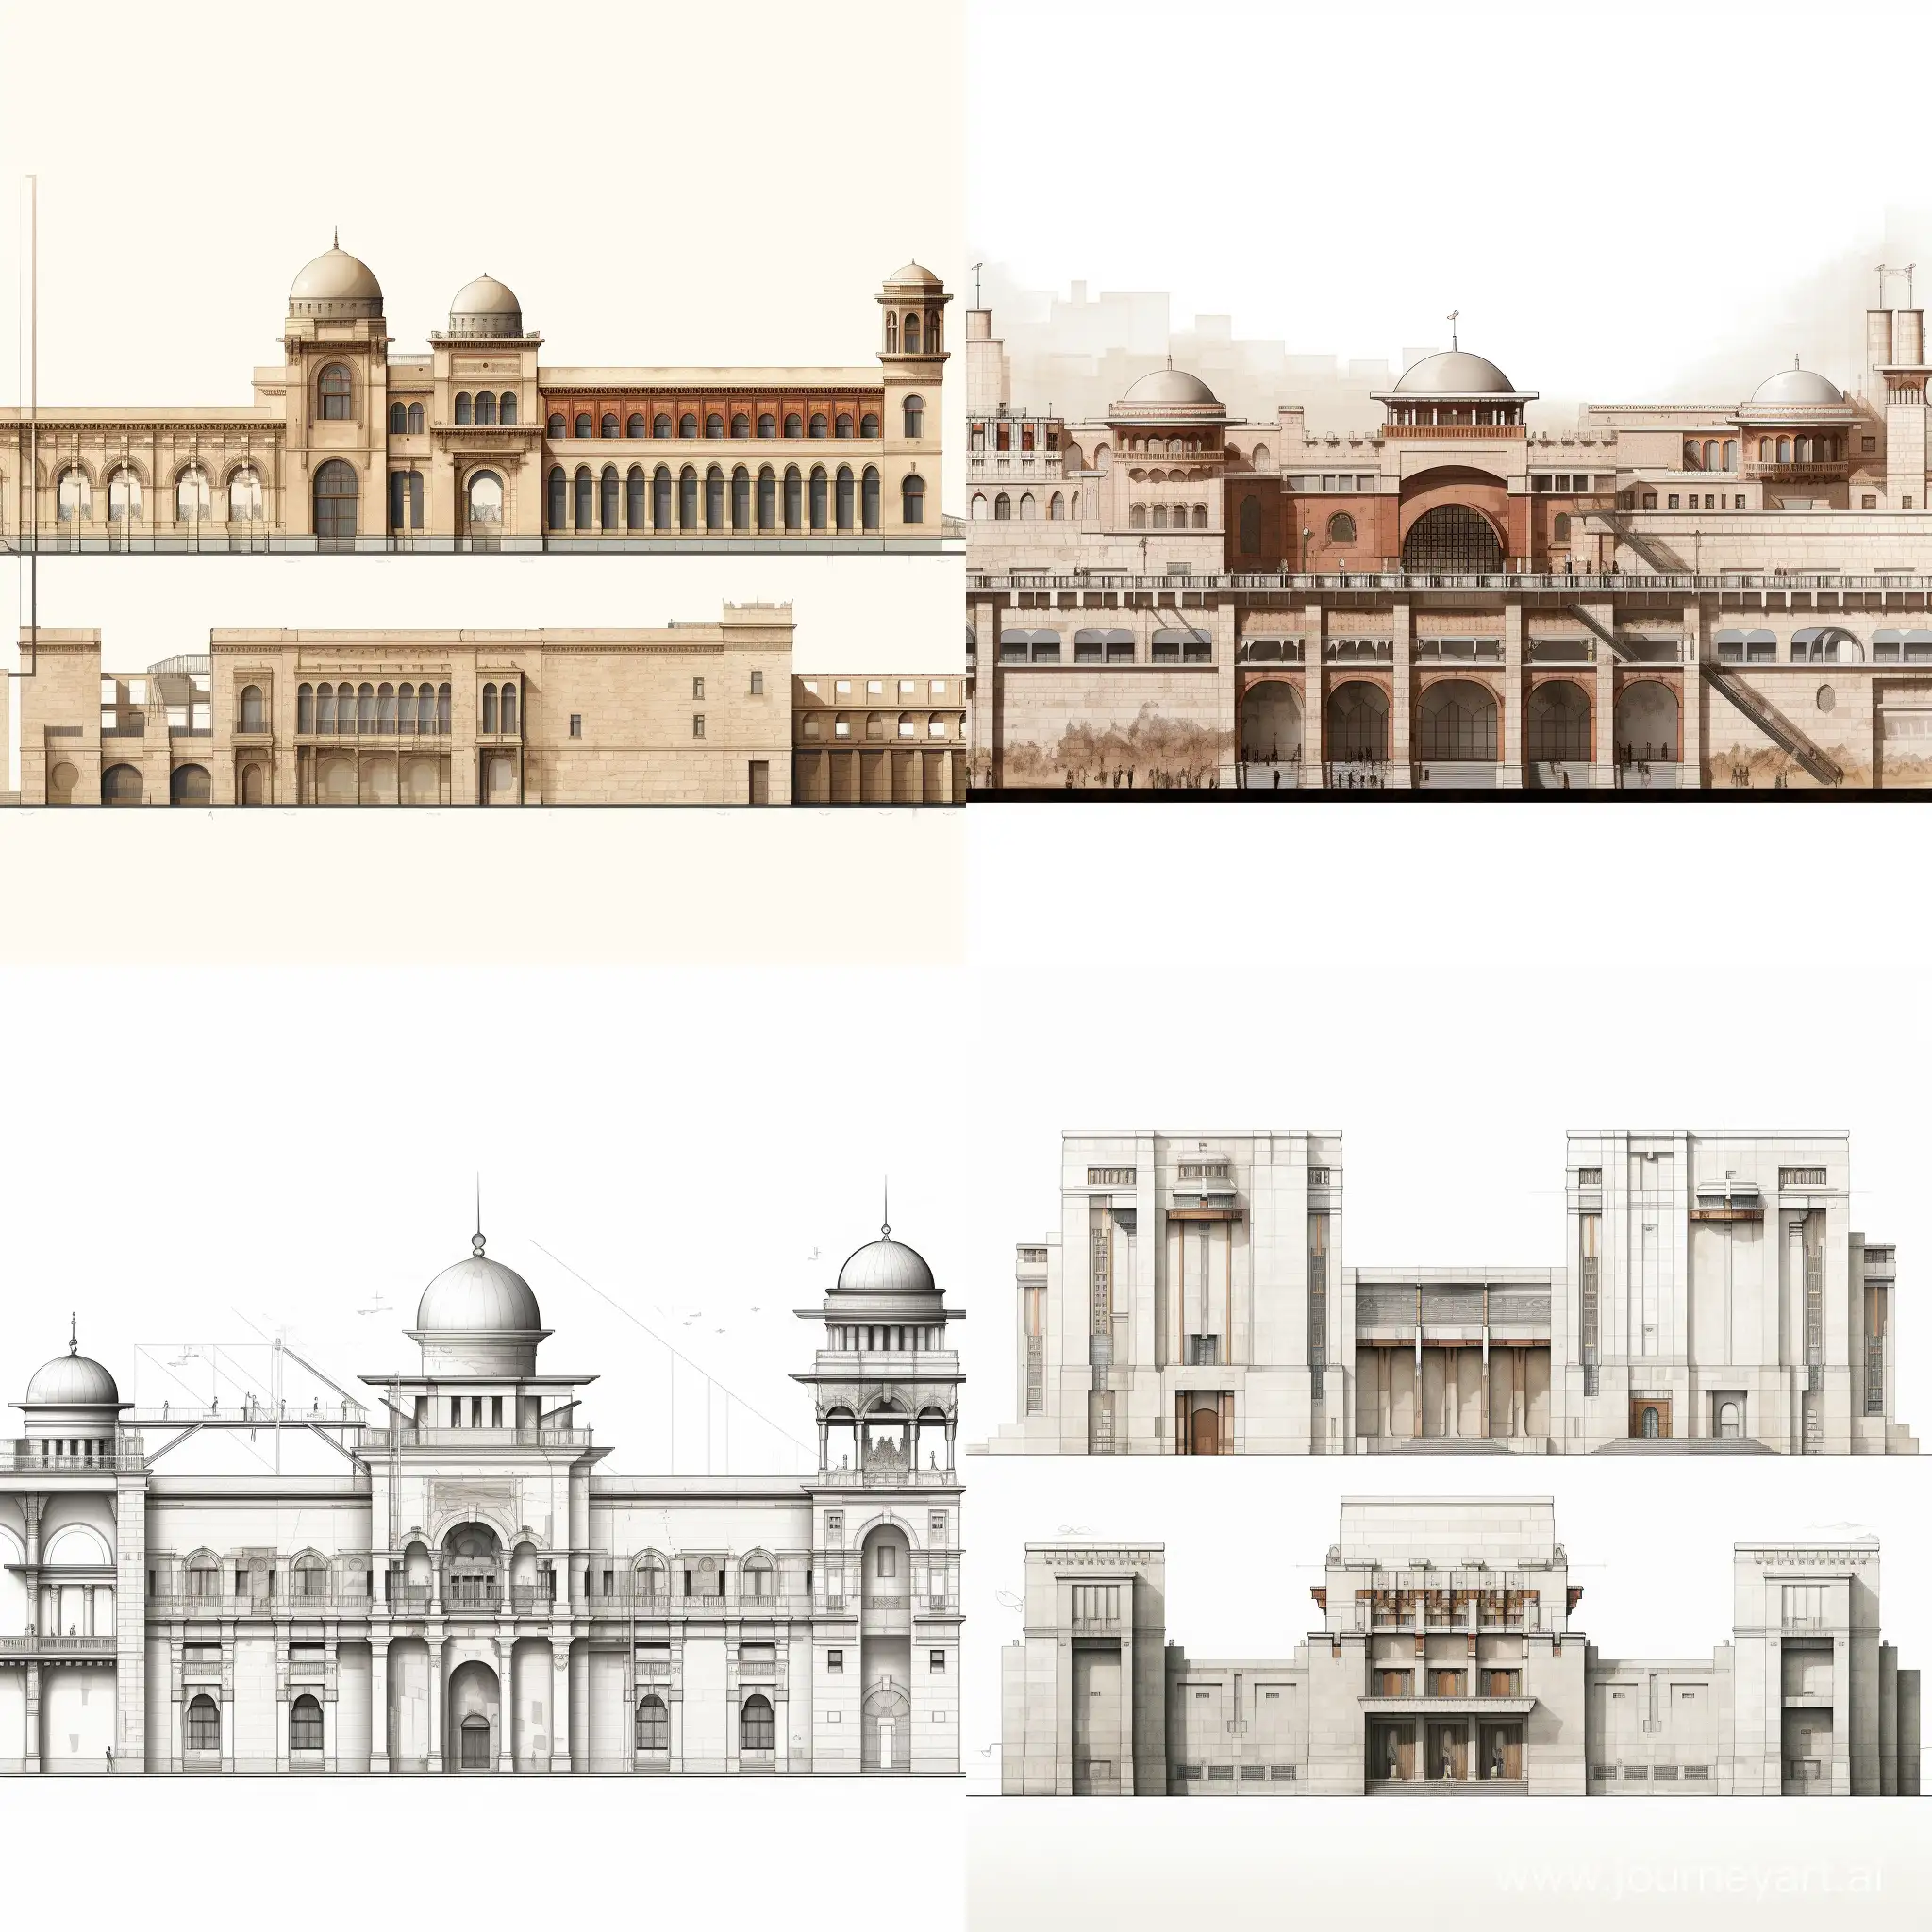 elevations of a university building inspired by Salah Aldin Citadel architecture style